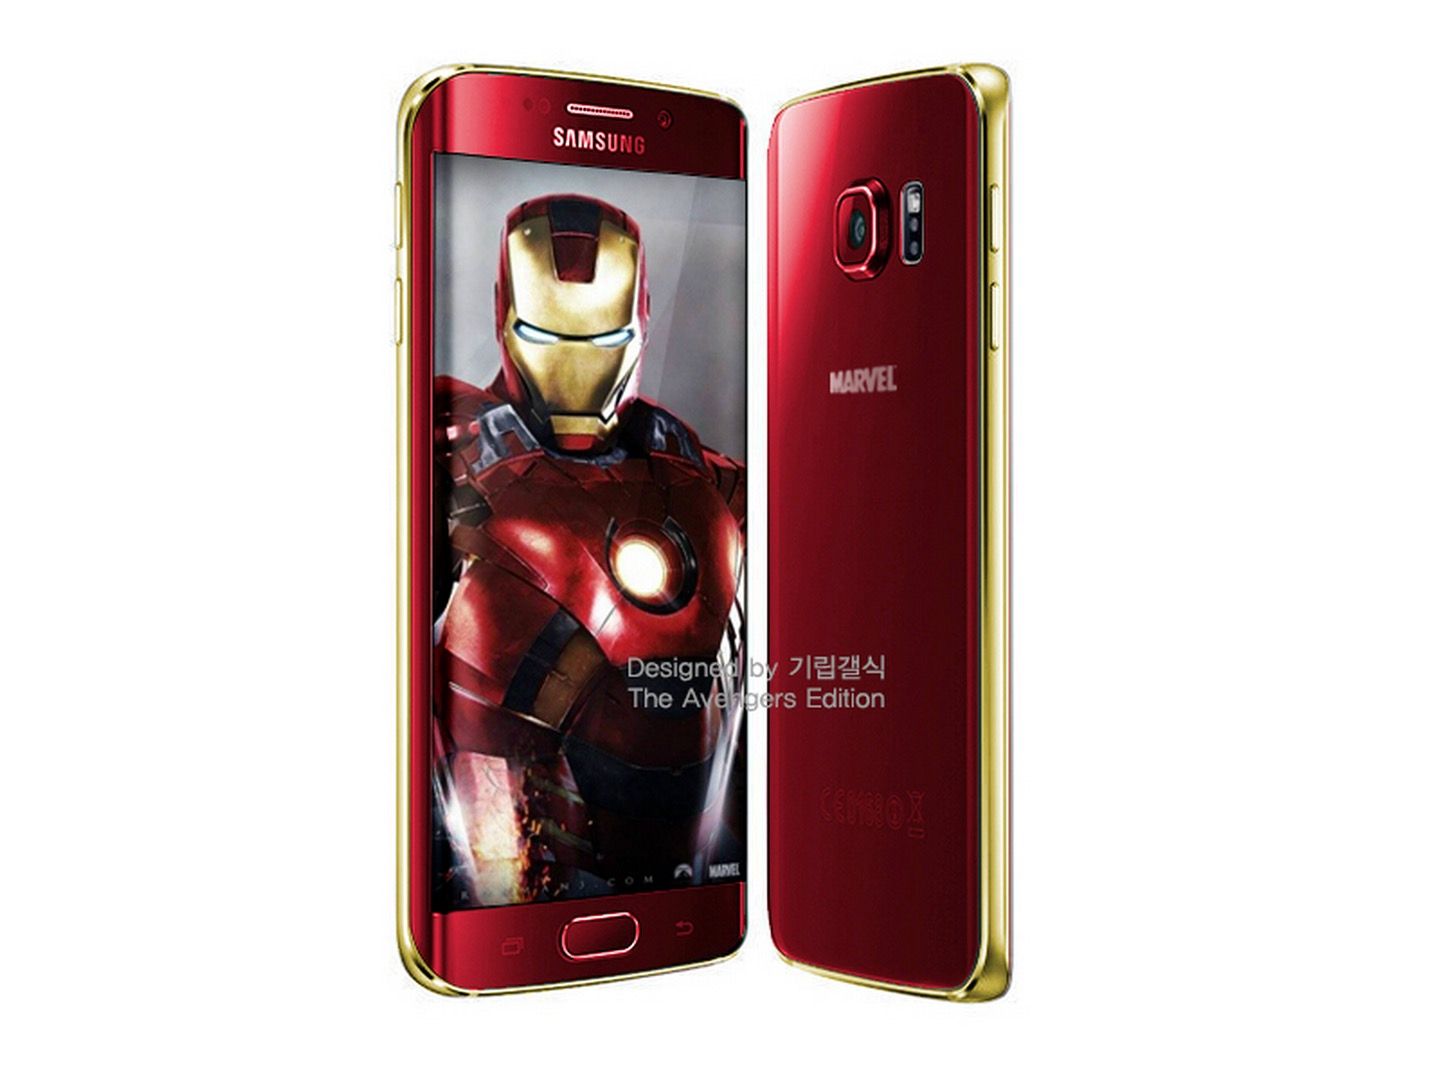 samsung iron man themed galaxy s6 and galaxy s6 edge expected to launch soon image 1